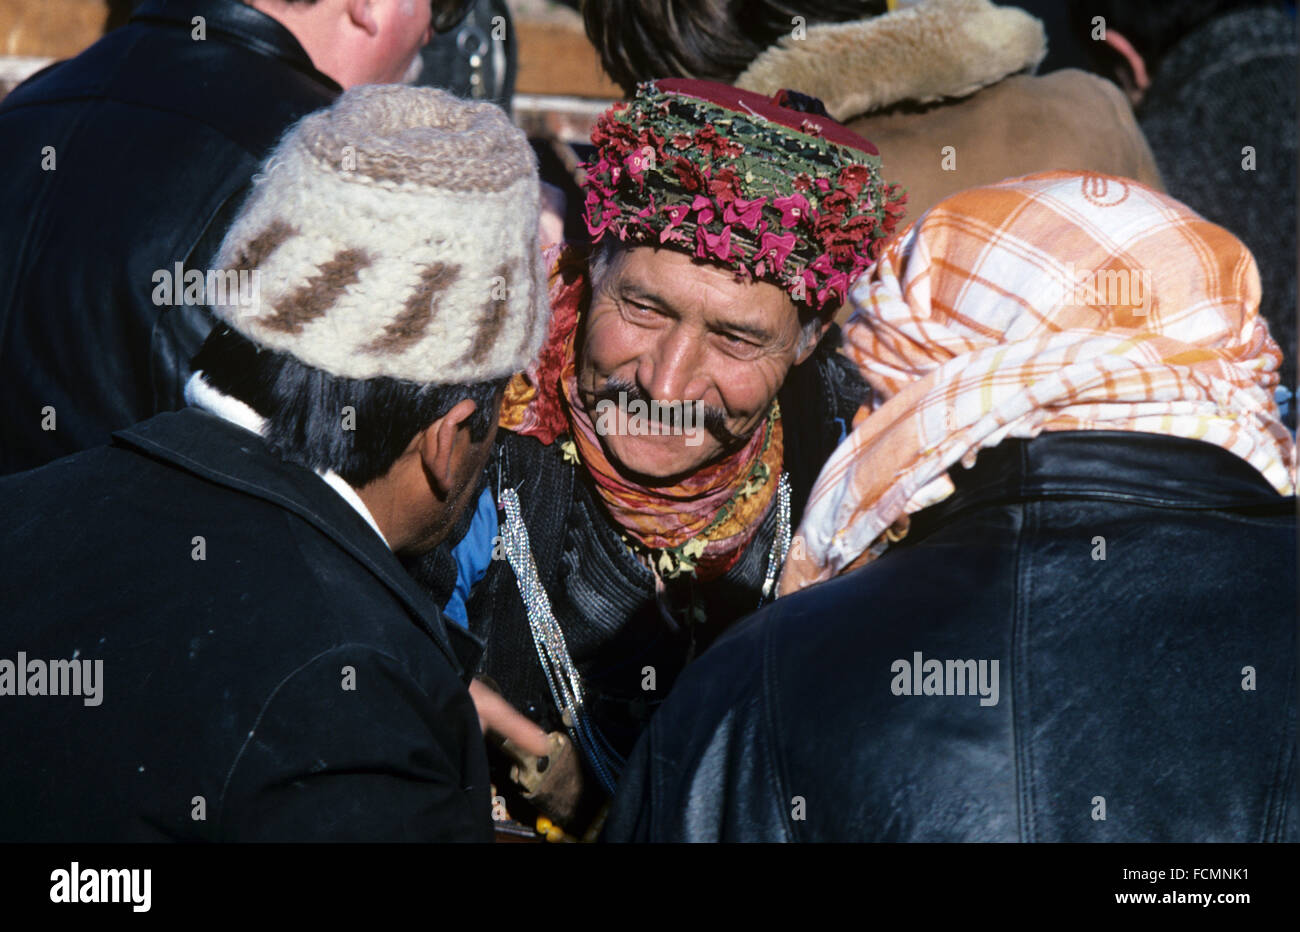 Three Turkish Men Wearing Traditional Turkish Dress, including (in center) Traditional Aegean Military Costume,known as Zeybek and Head Wear in Conversation at the Annual Camel Wrestling Championship, Ephesus, turkey Stock Photo